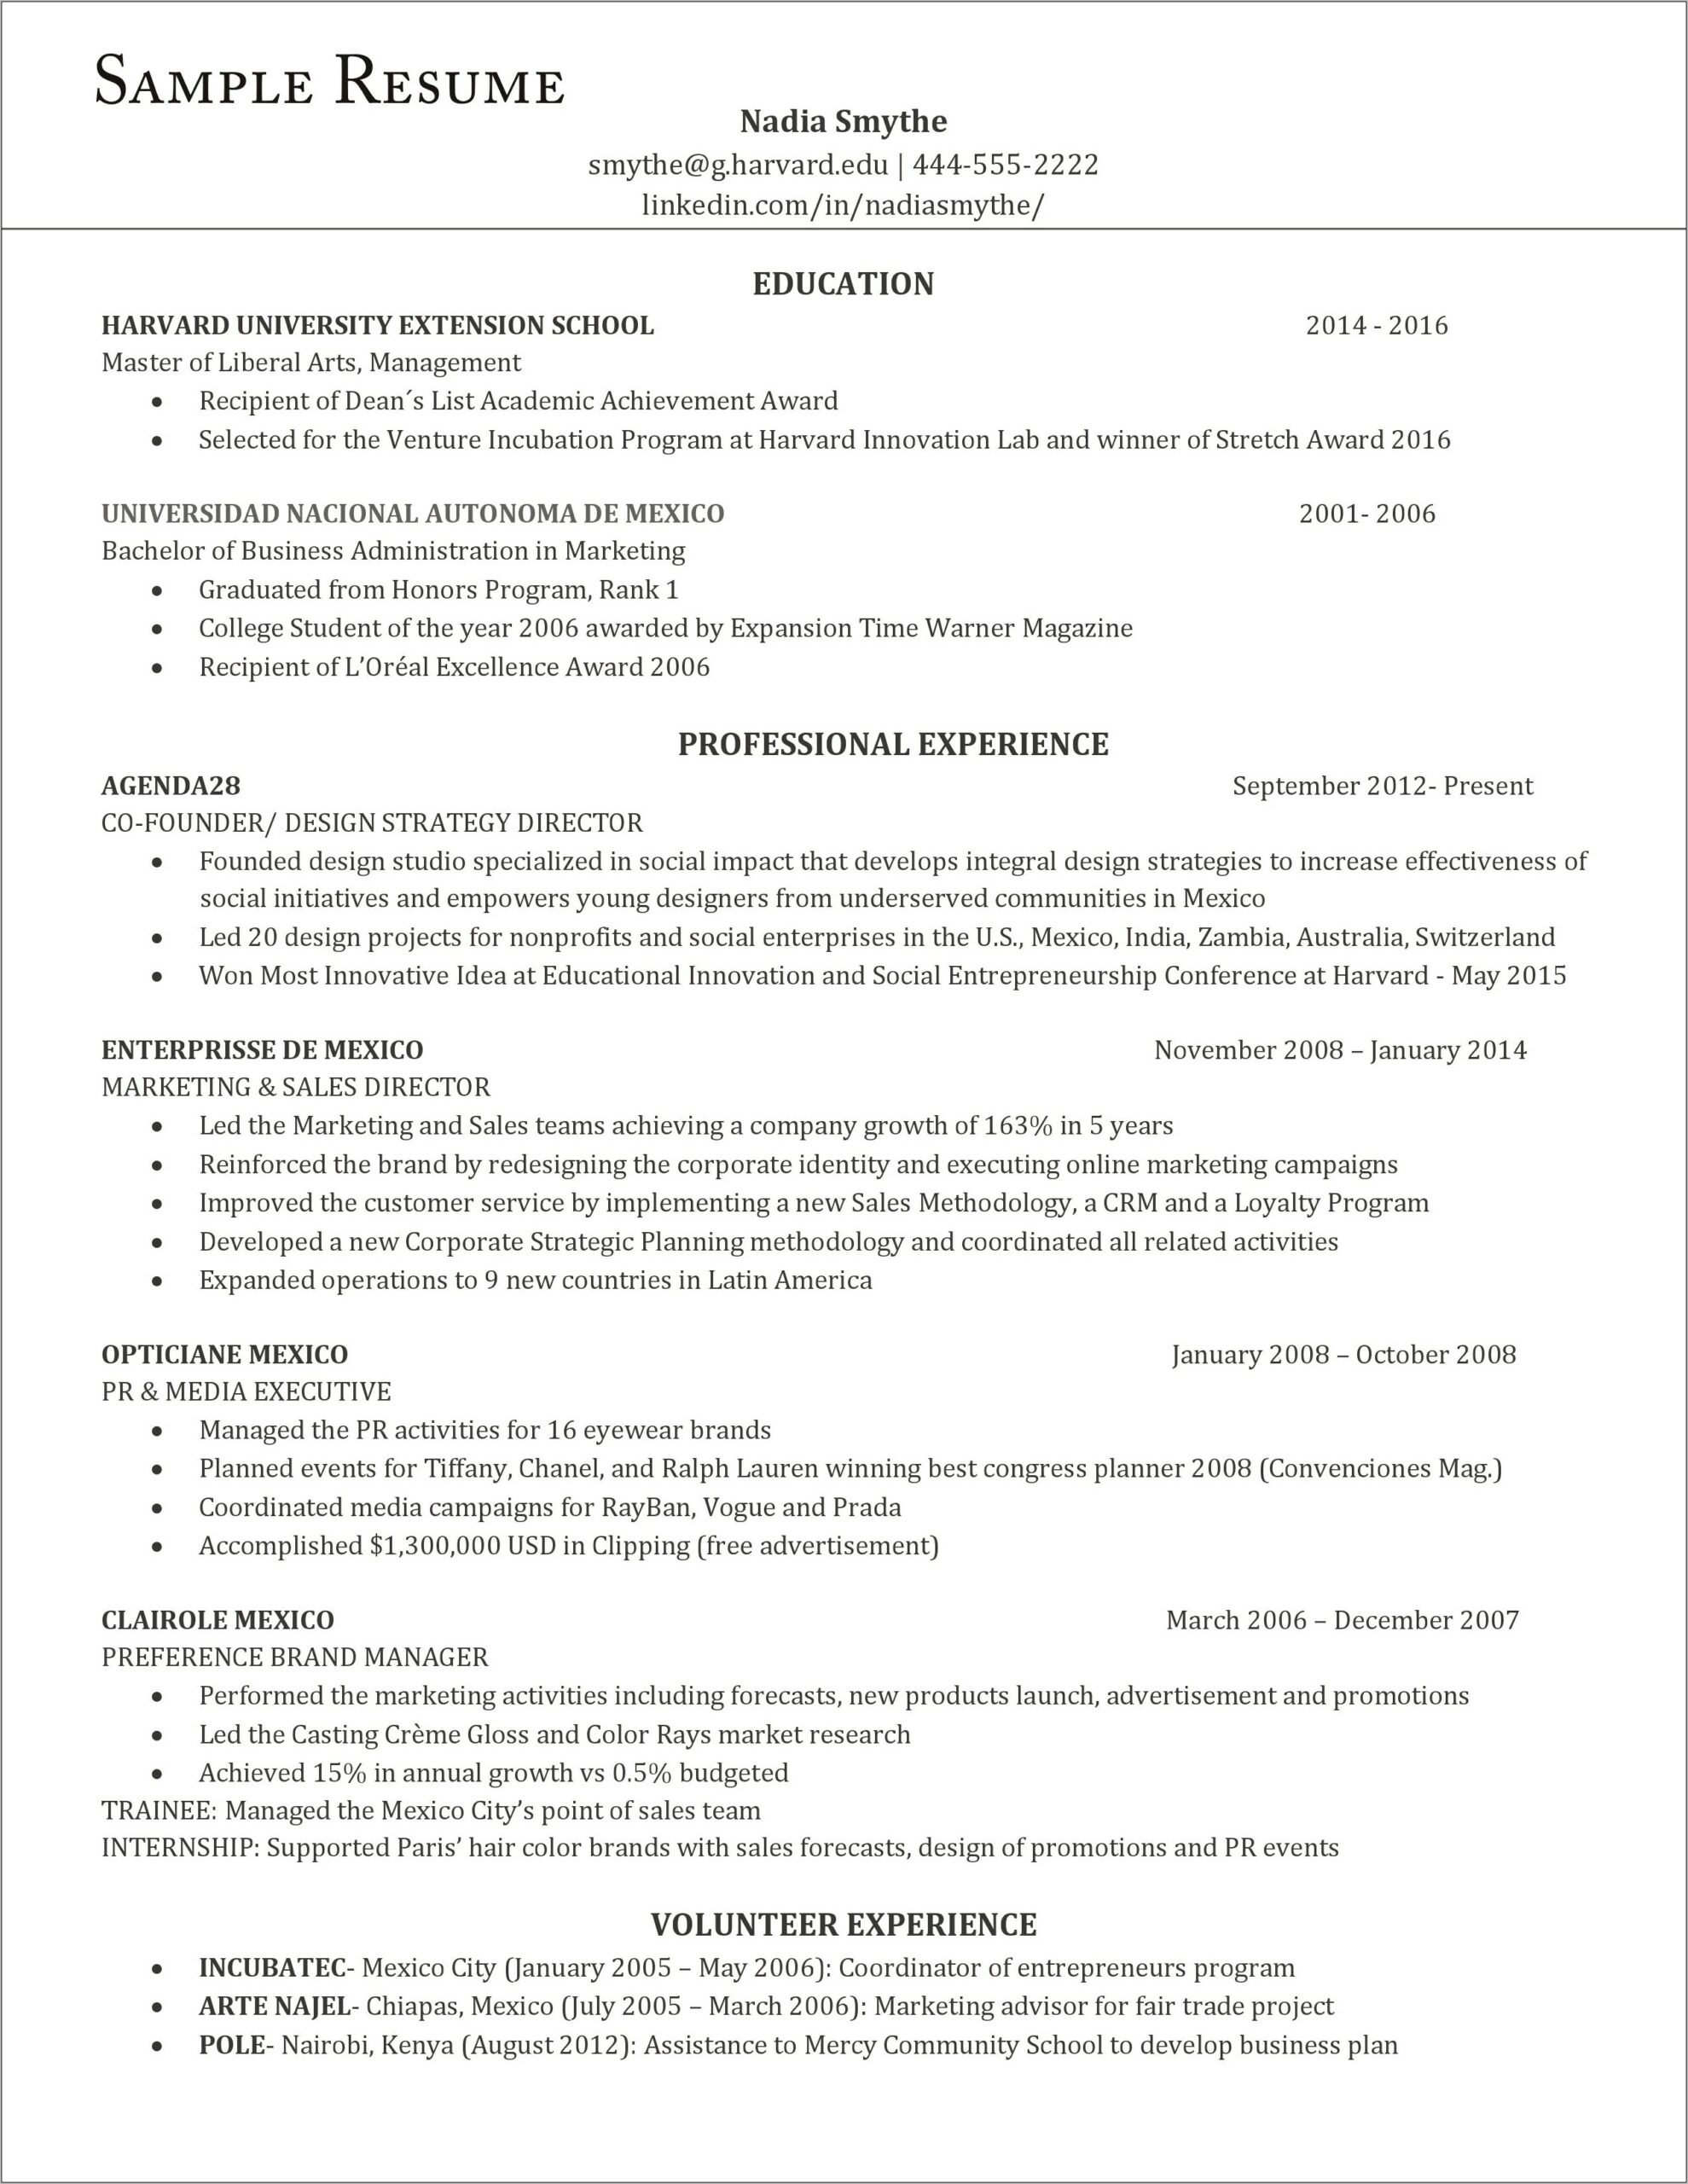 Example Resume For A College Student